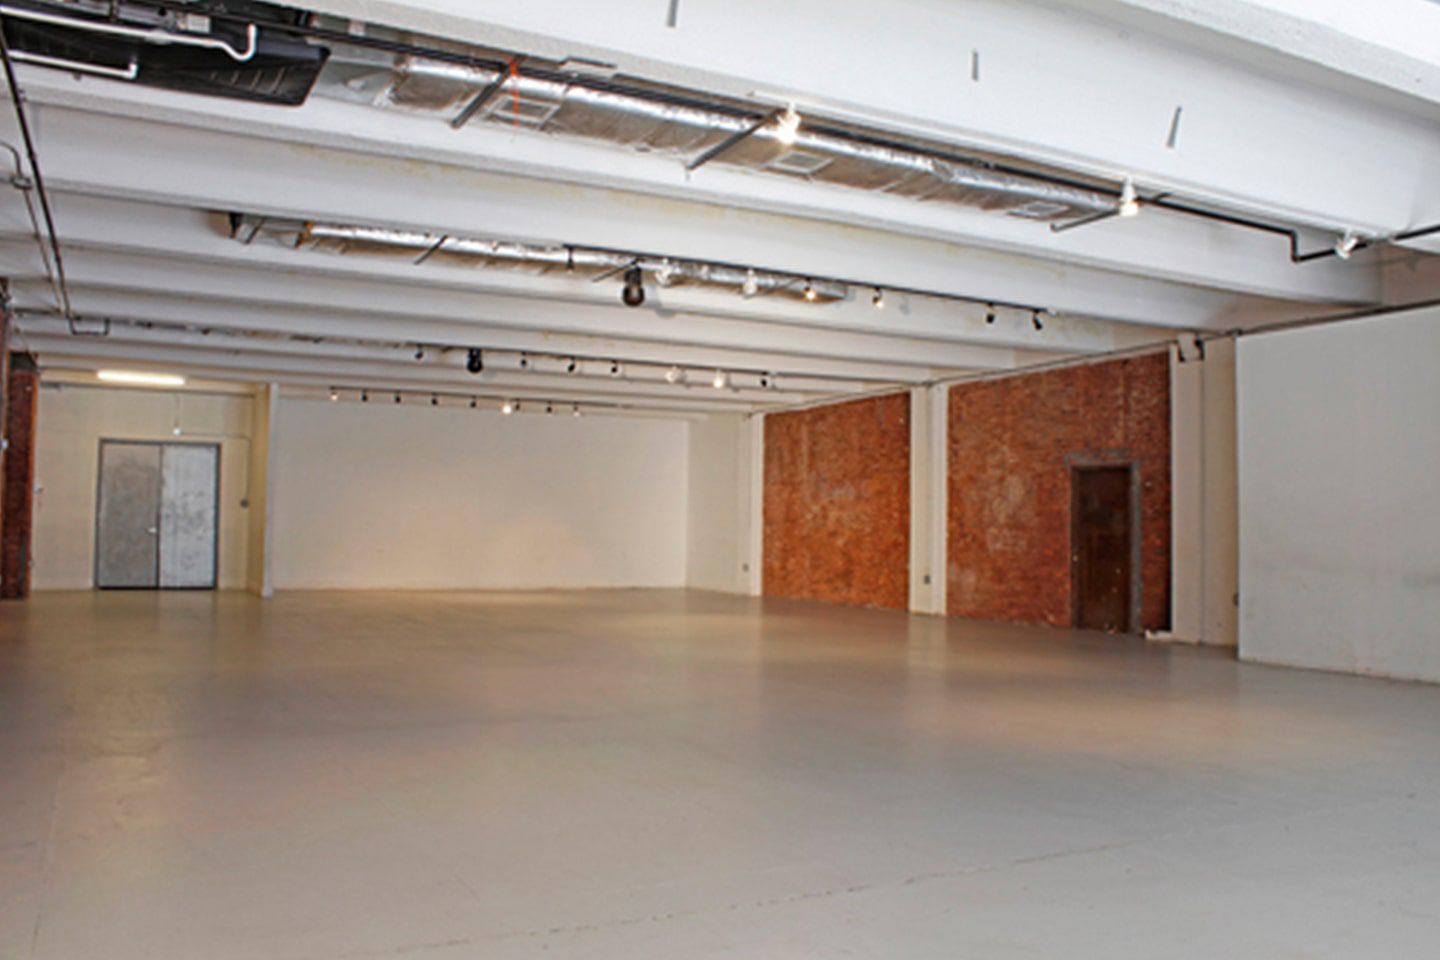 A large empty room with brick walls and white floors.